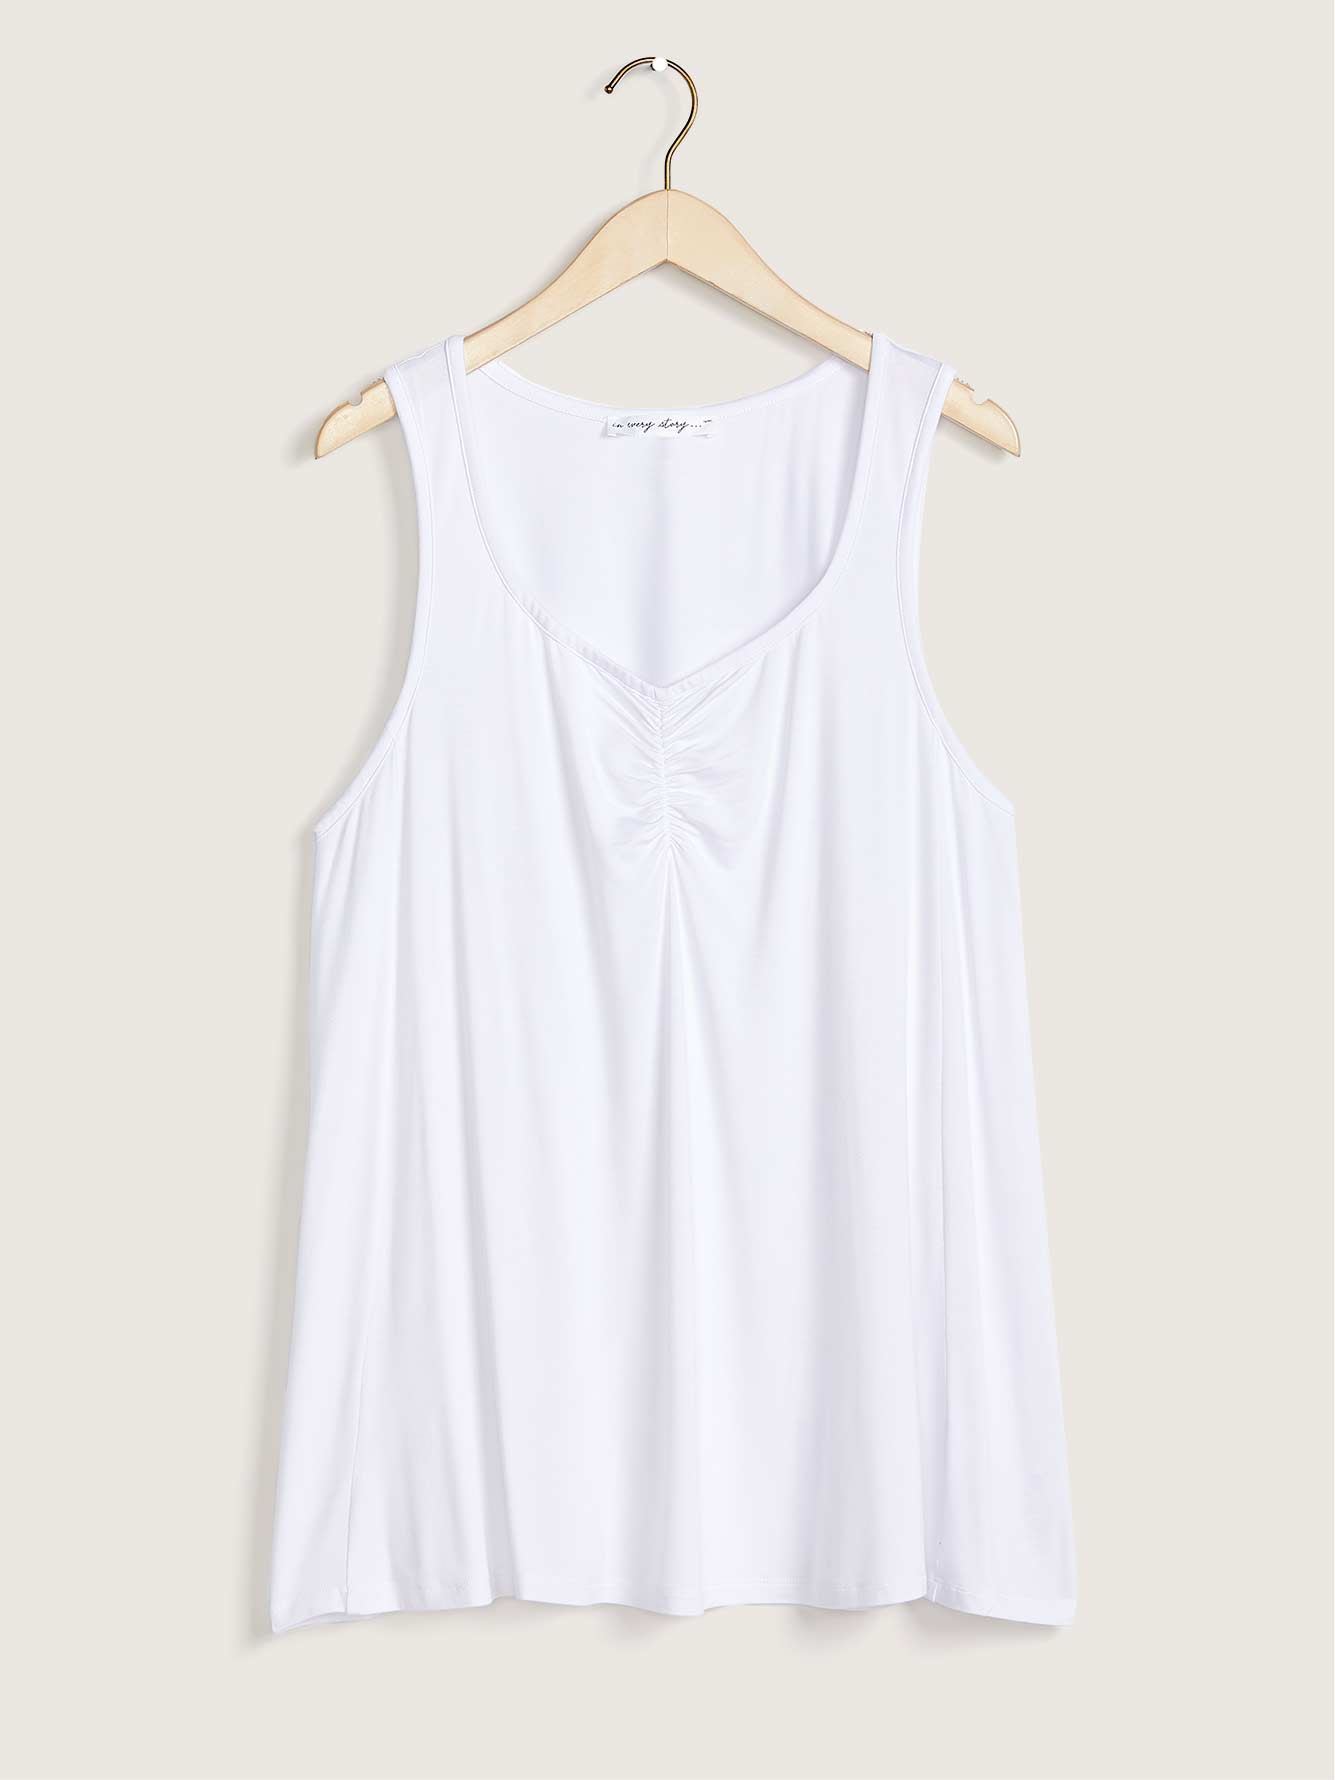 Sweetheart Tank Top, Solid - In Every Story | Penningtons